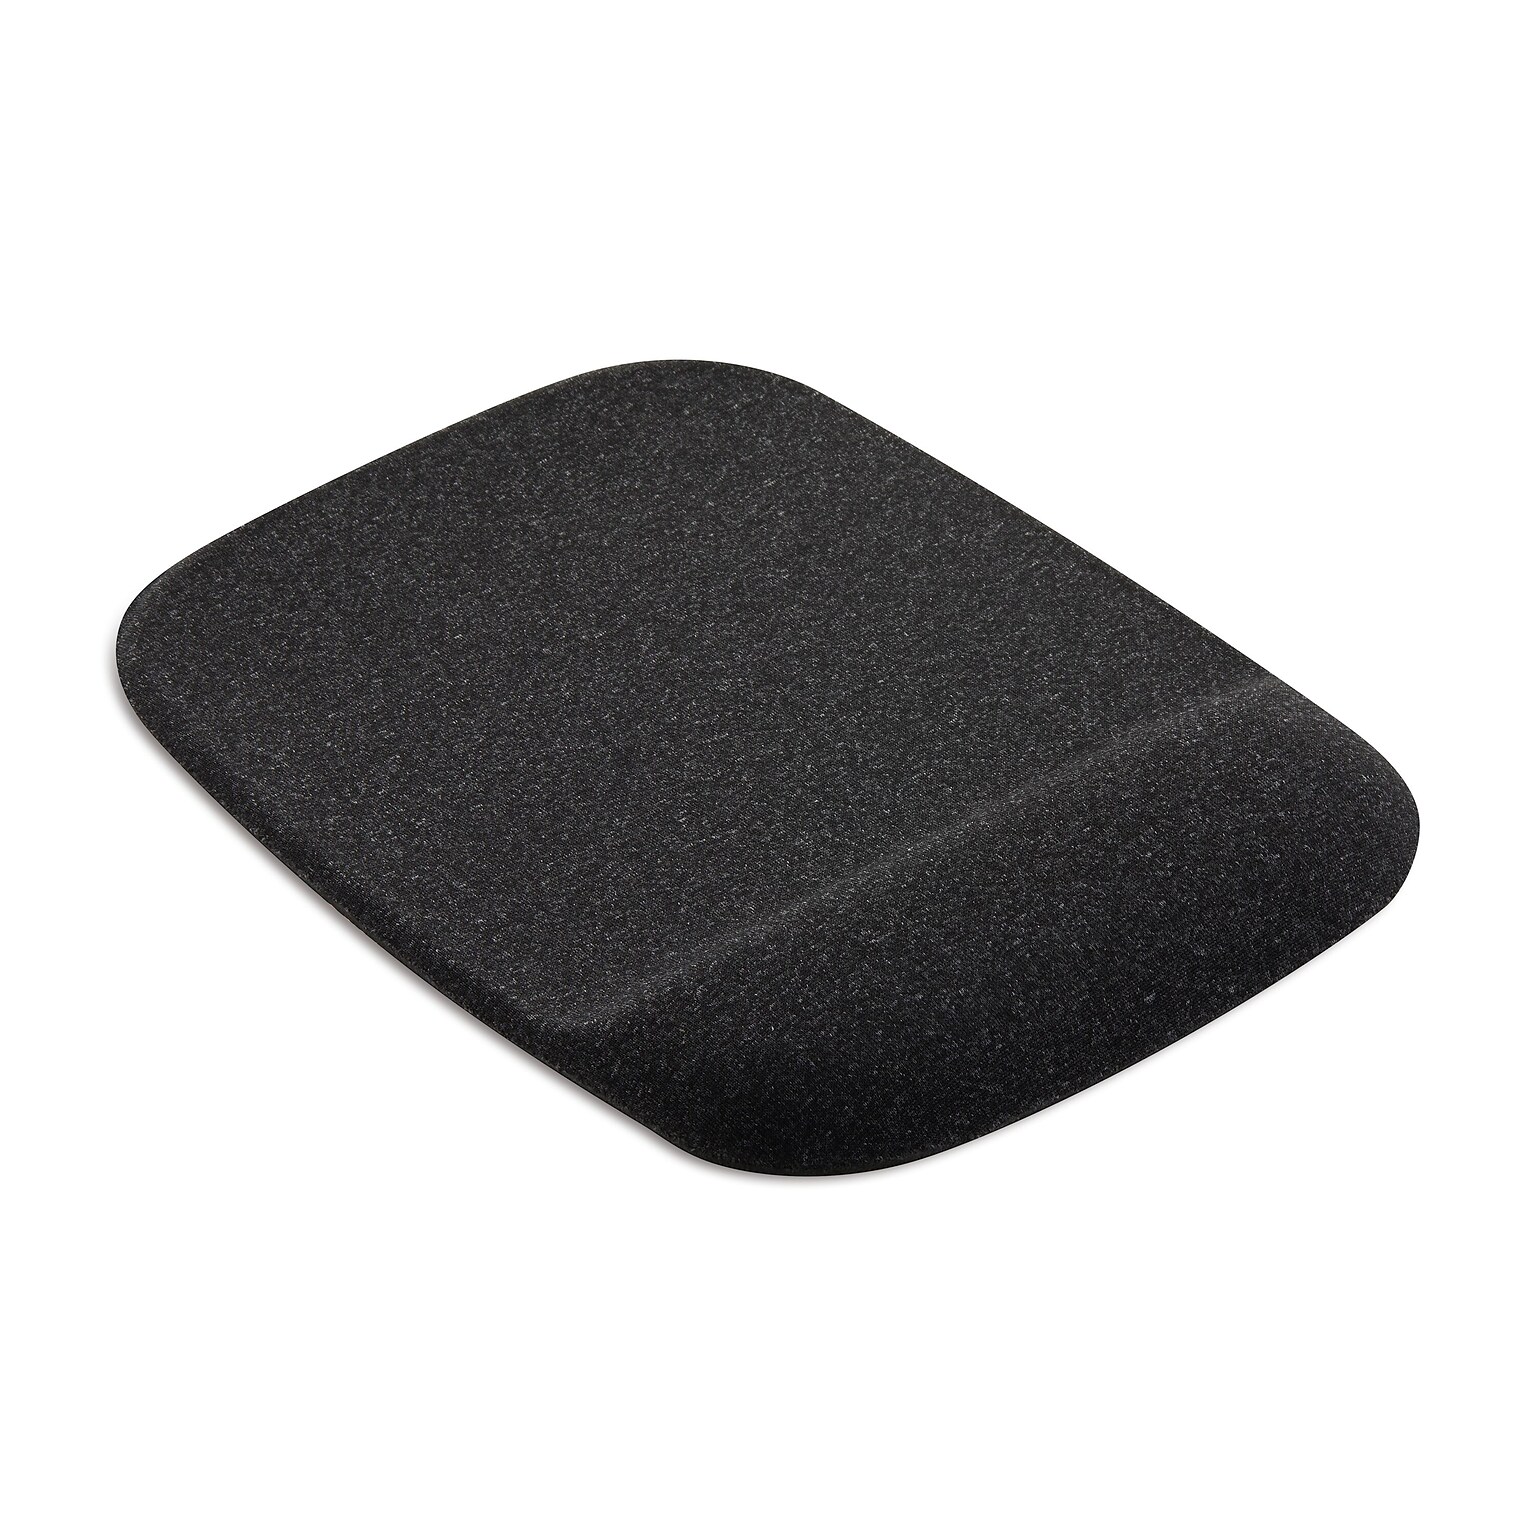 Quill Brand® Mouse Pad with Gel Wrist Rest, Black (53326)